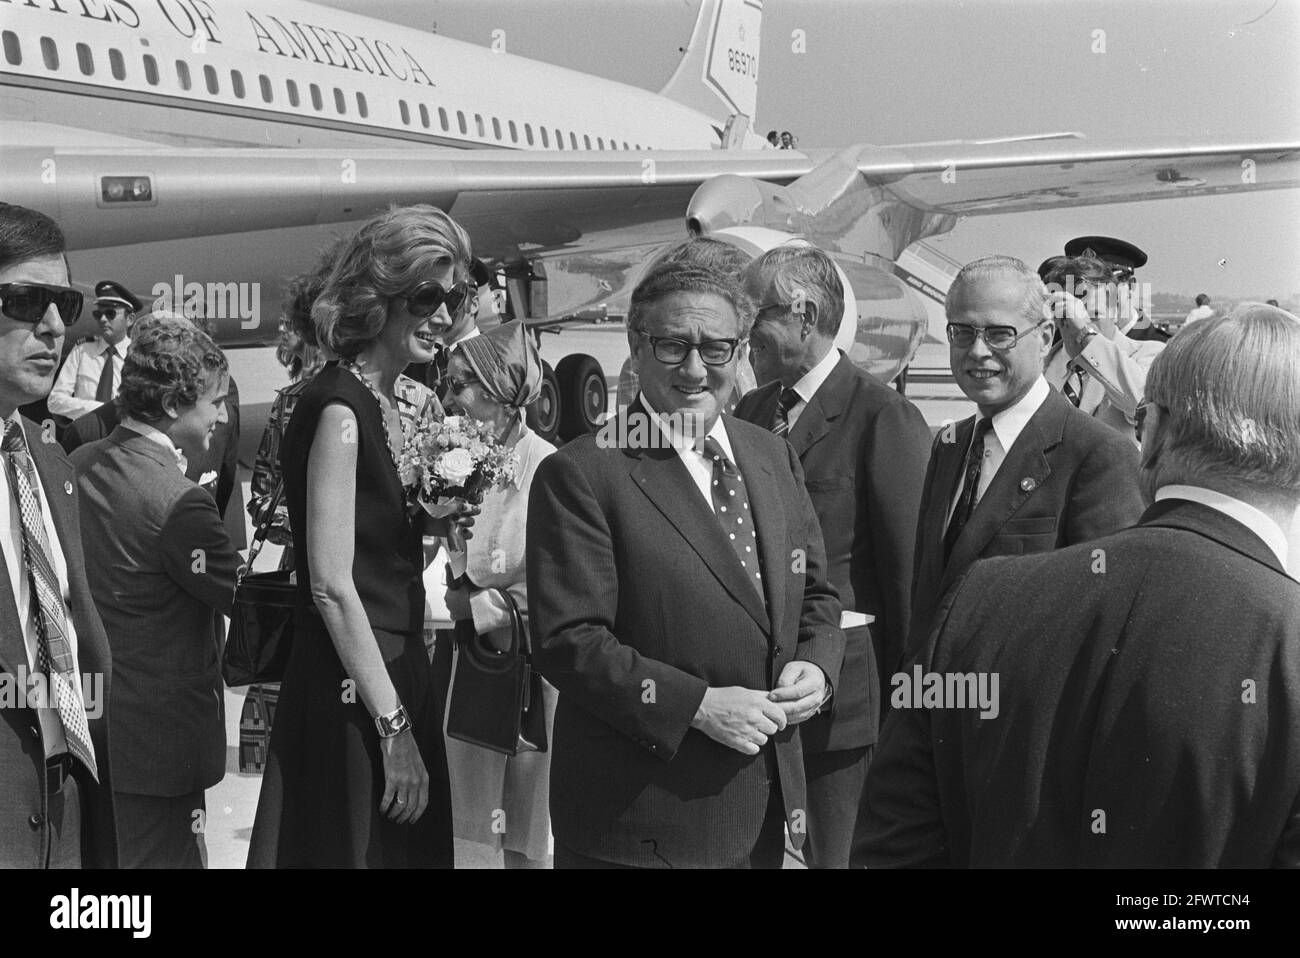 Am. Min. v Buza Affairs, Dr. Henry Kissinger visits the Netherlands; arrival Schiphol, Kissinger with wife Nancy, August 11, 1976, Ministers, The Netherlands, 20th century press agency photo, news to remember, documentary, historic photography 1945-1990, visual stories, human history of the Twentieth Century, capturing moments in time Stock Photo